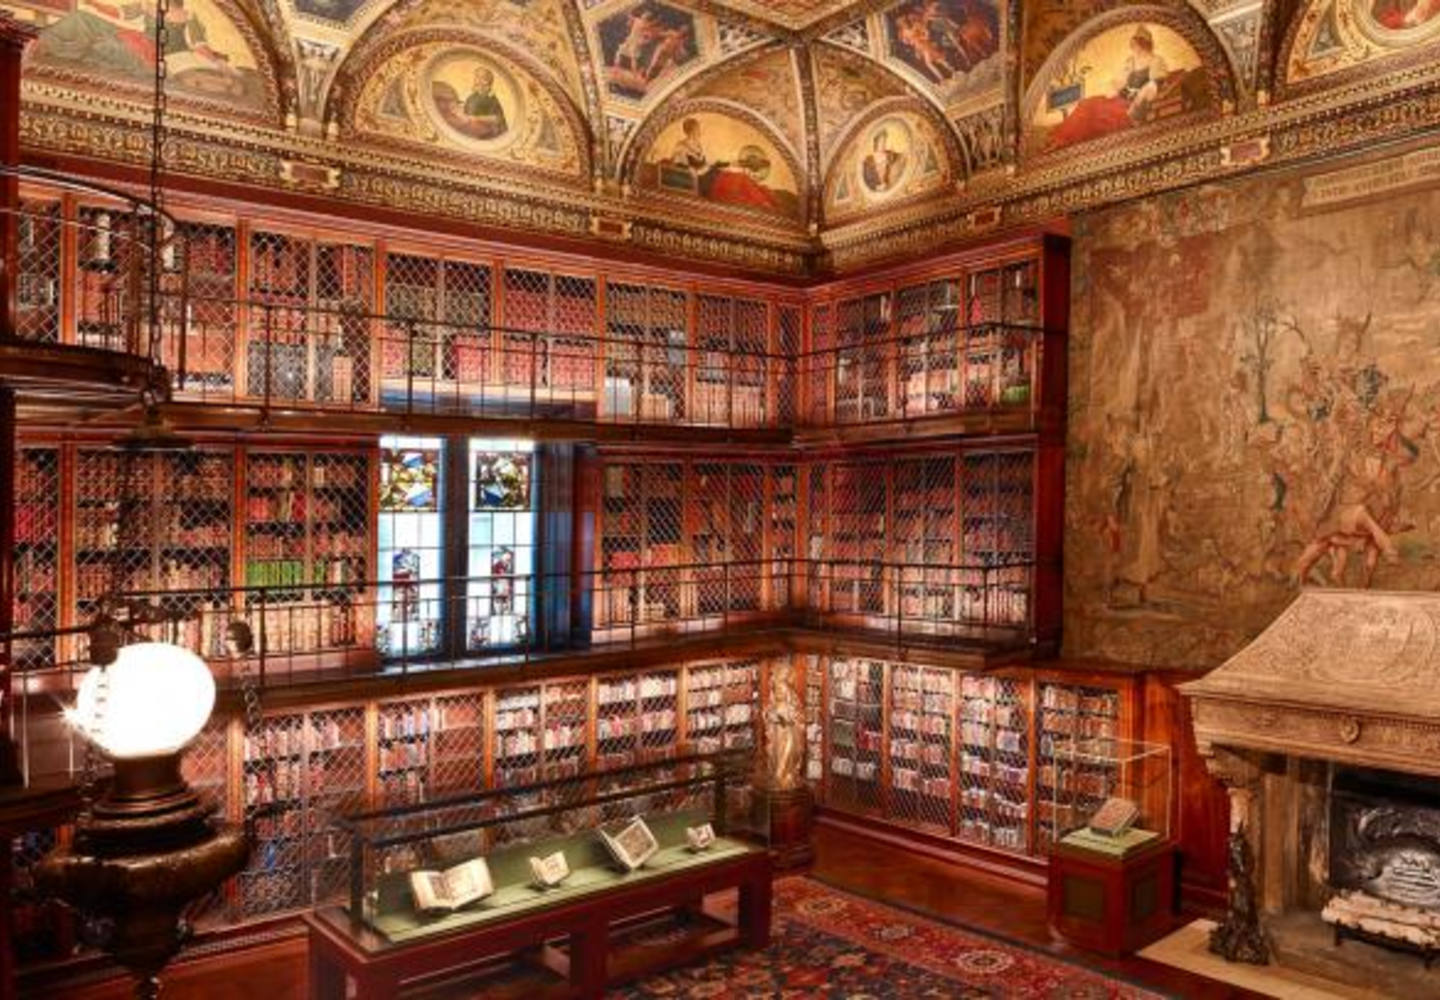 Treasures from the Morgan Library & Museum: “I Want a Gem”